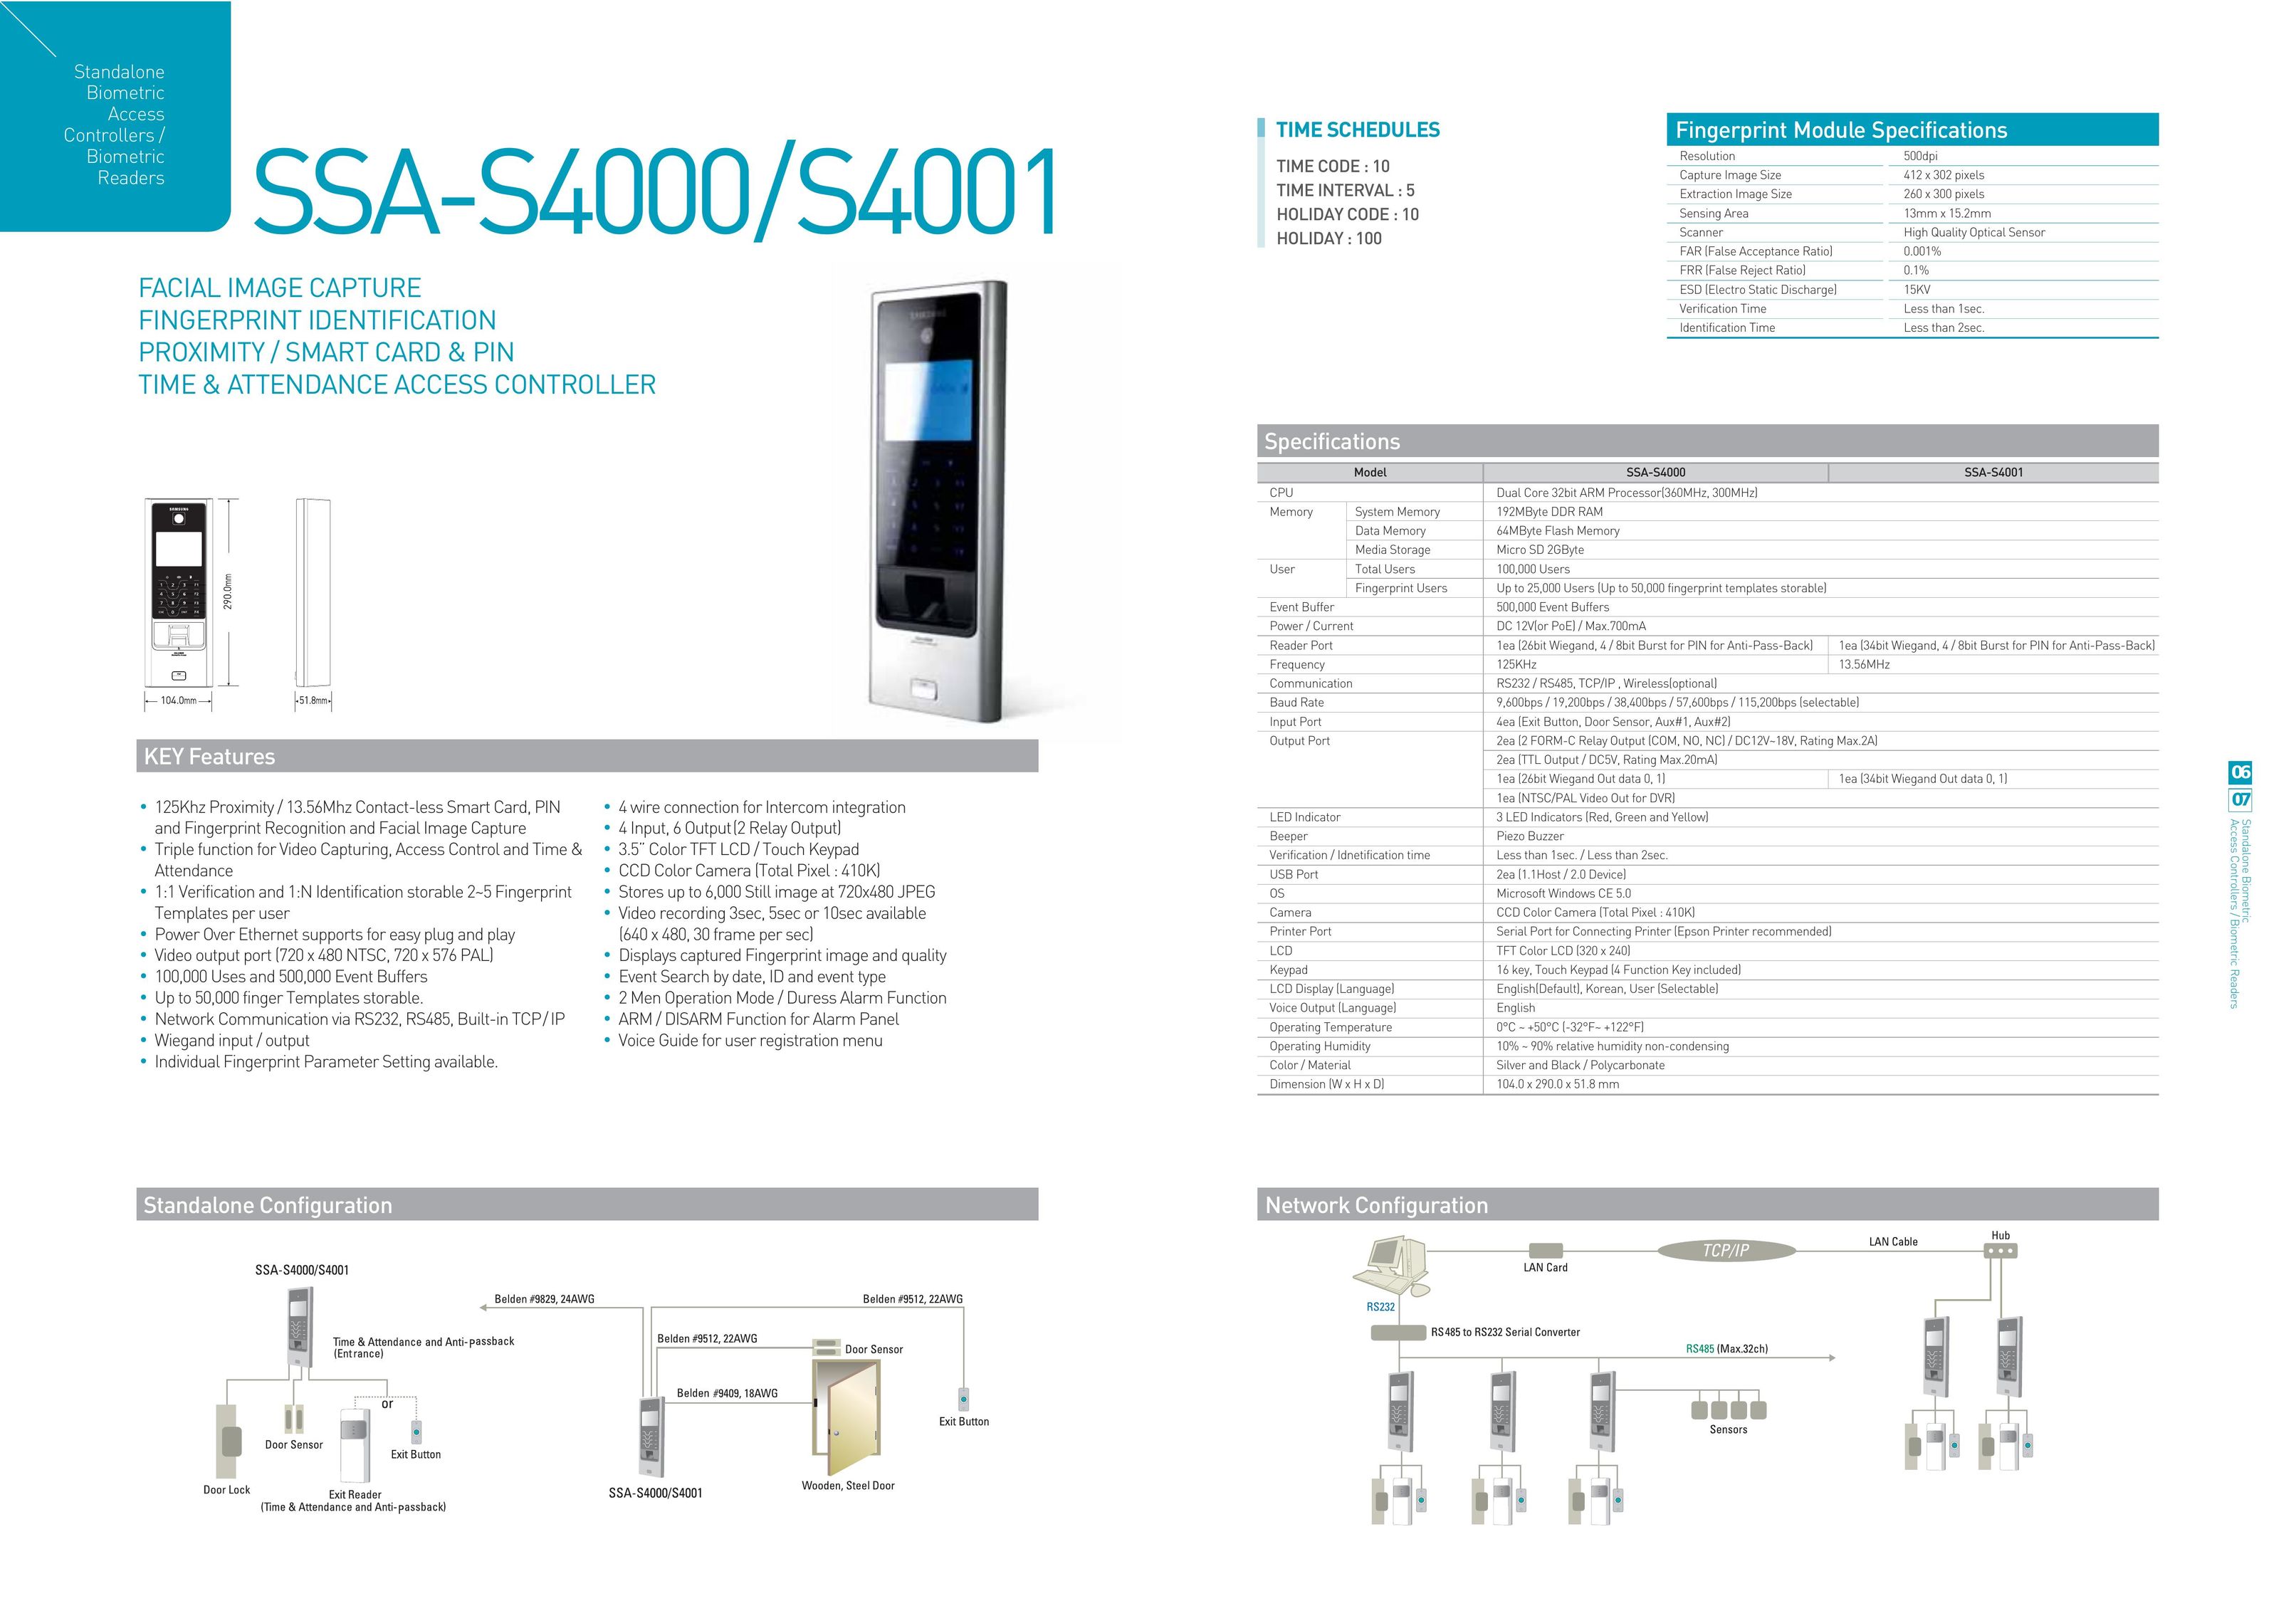 Samsung SSA-S4001 Home Security System User Manual